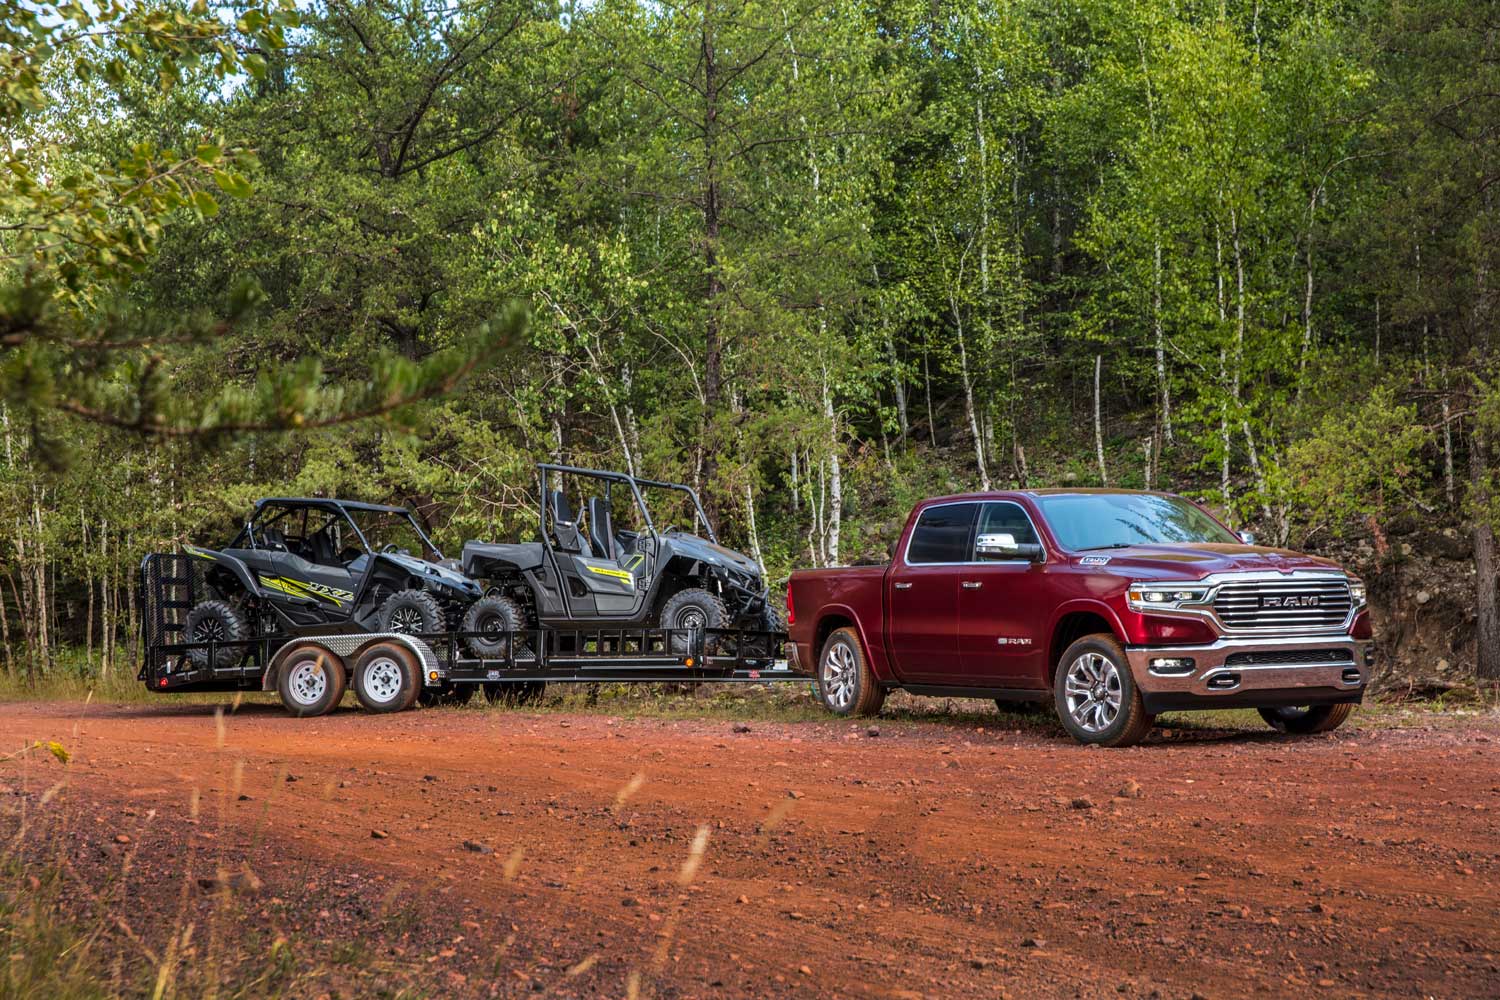 2023 Ram 1500 has a trailer attached and is hauling two recreational vehicles.